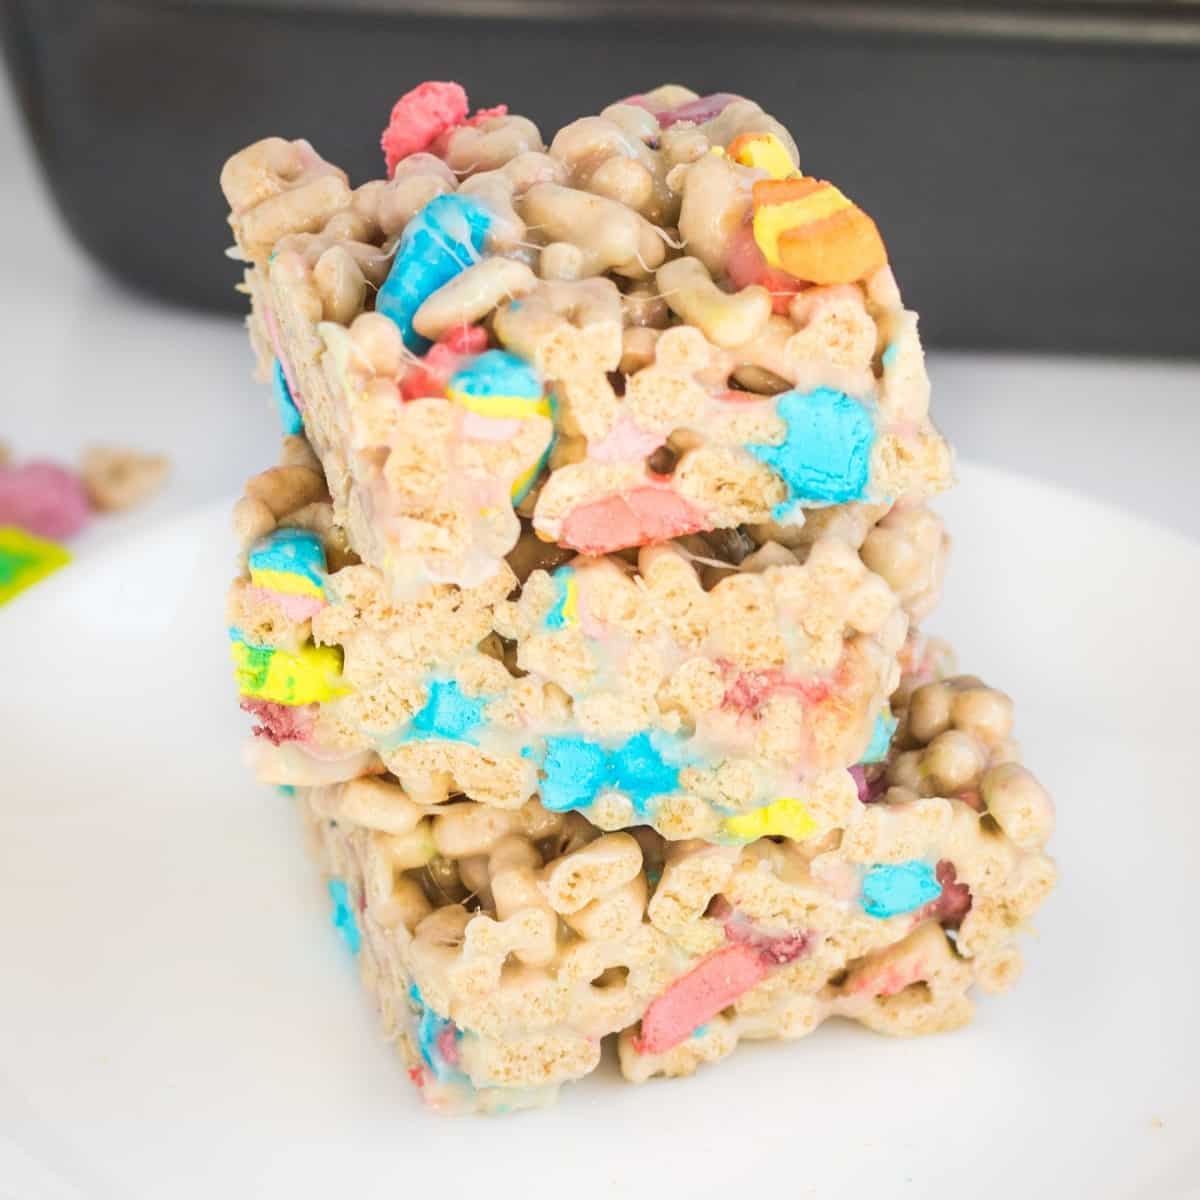 Lucky Charms Bars (Easy No-Bake Cereal and Marshmallow Treats)